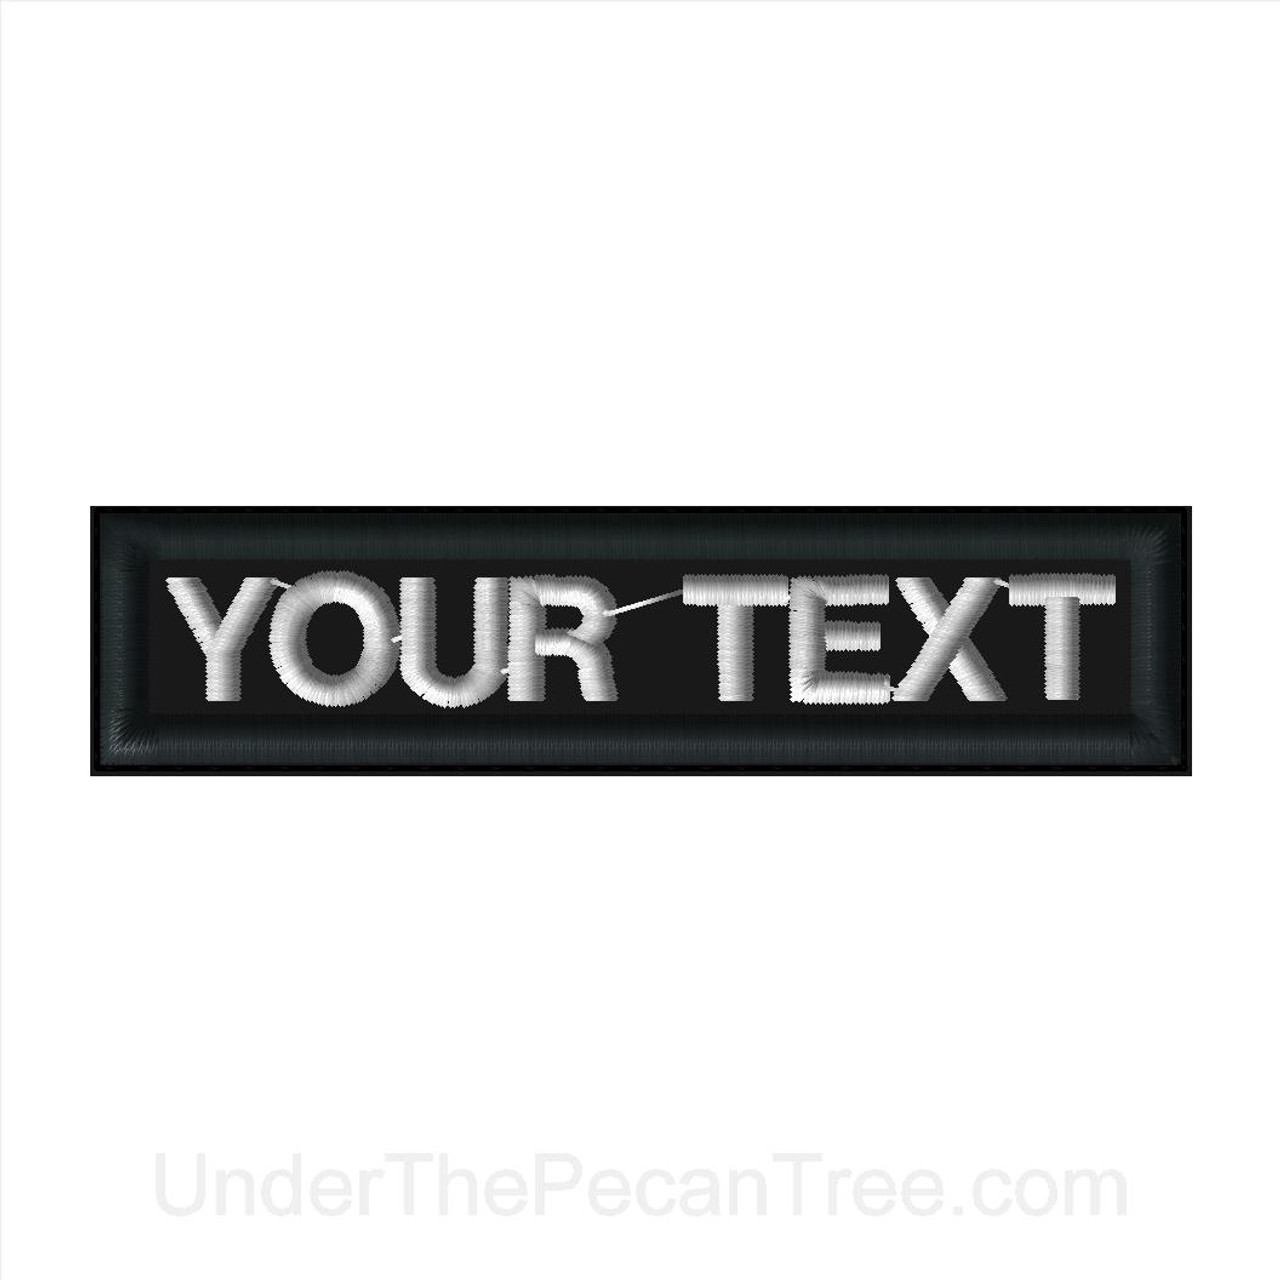 ROADDOCS NAME PATCH BLACK PATCH WHITE TEXT - Under The Pecan Tree